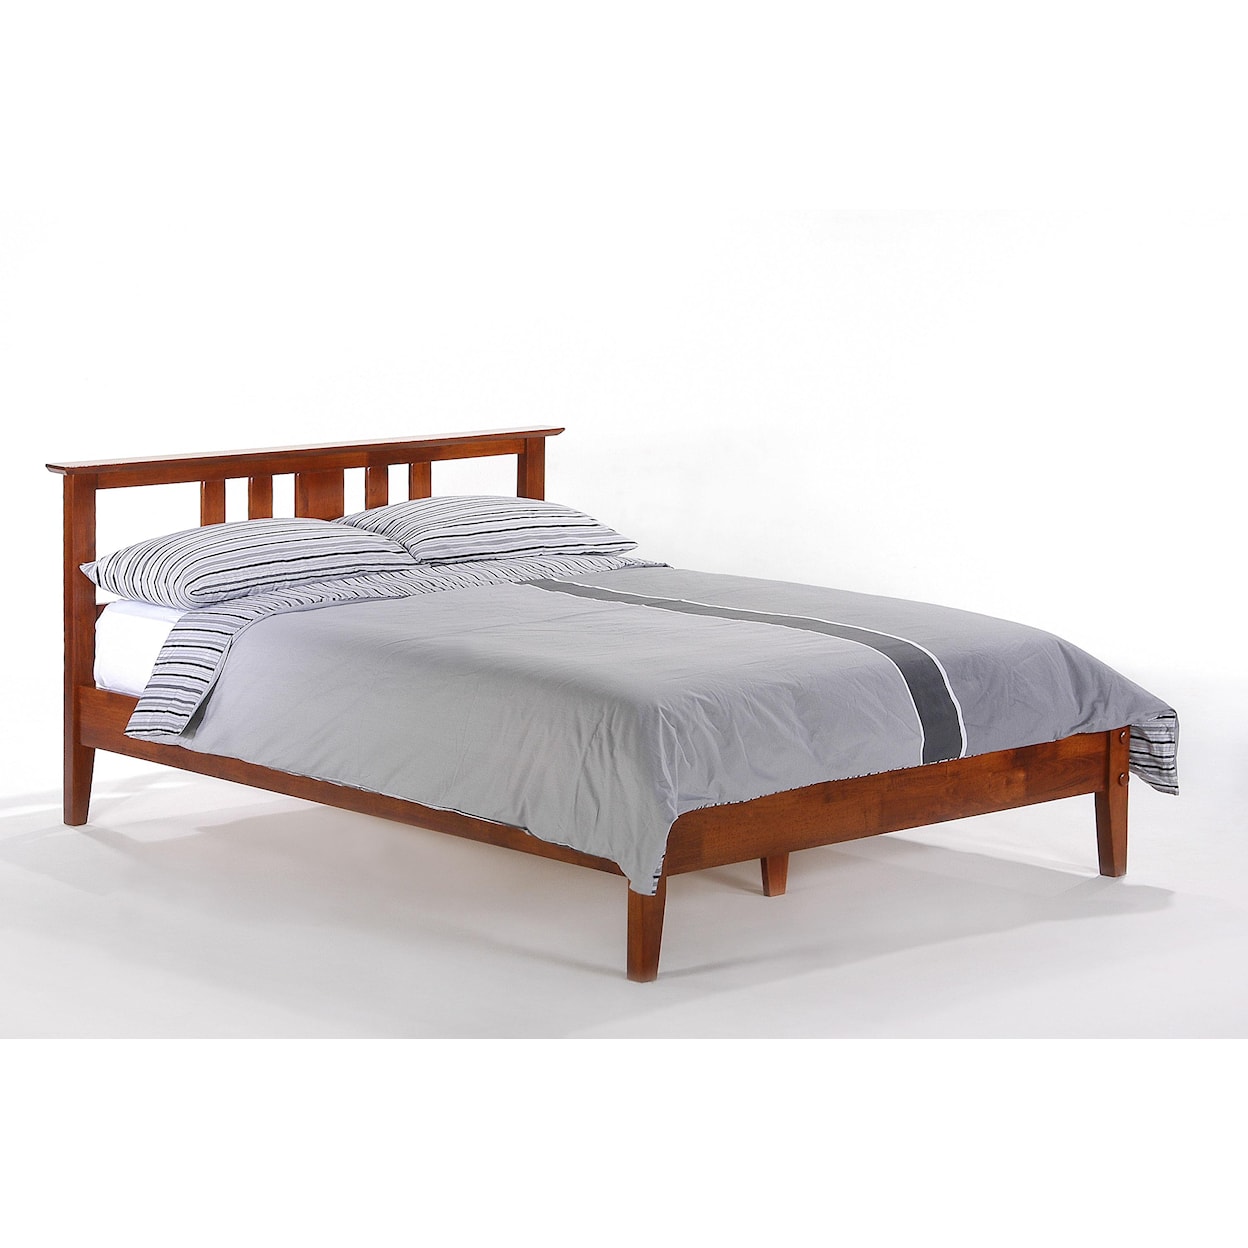 Pacific Manufacturing Thyme Full Bed